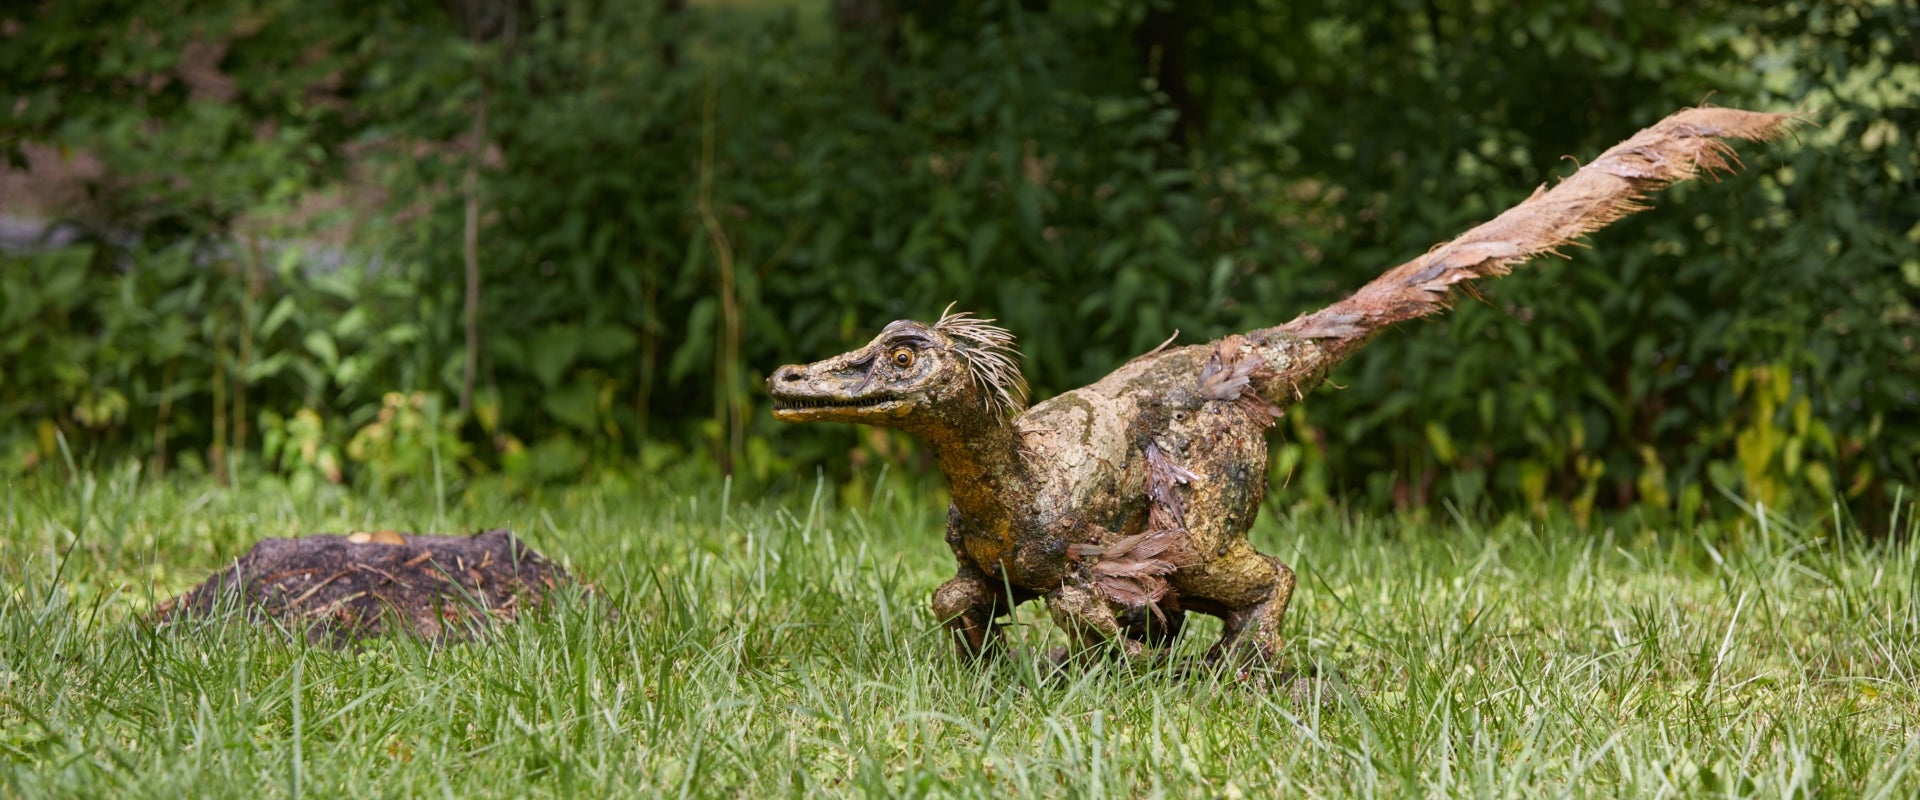 A small fabricated prehistoric animal made of natural materials. 